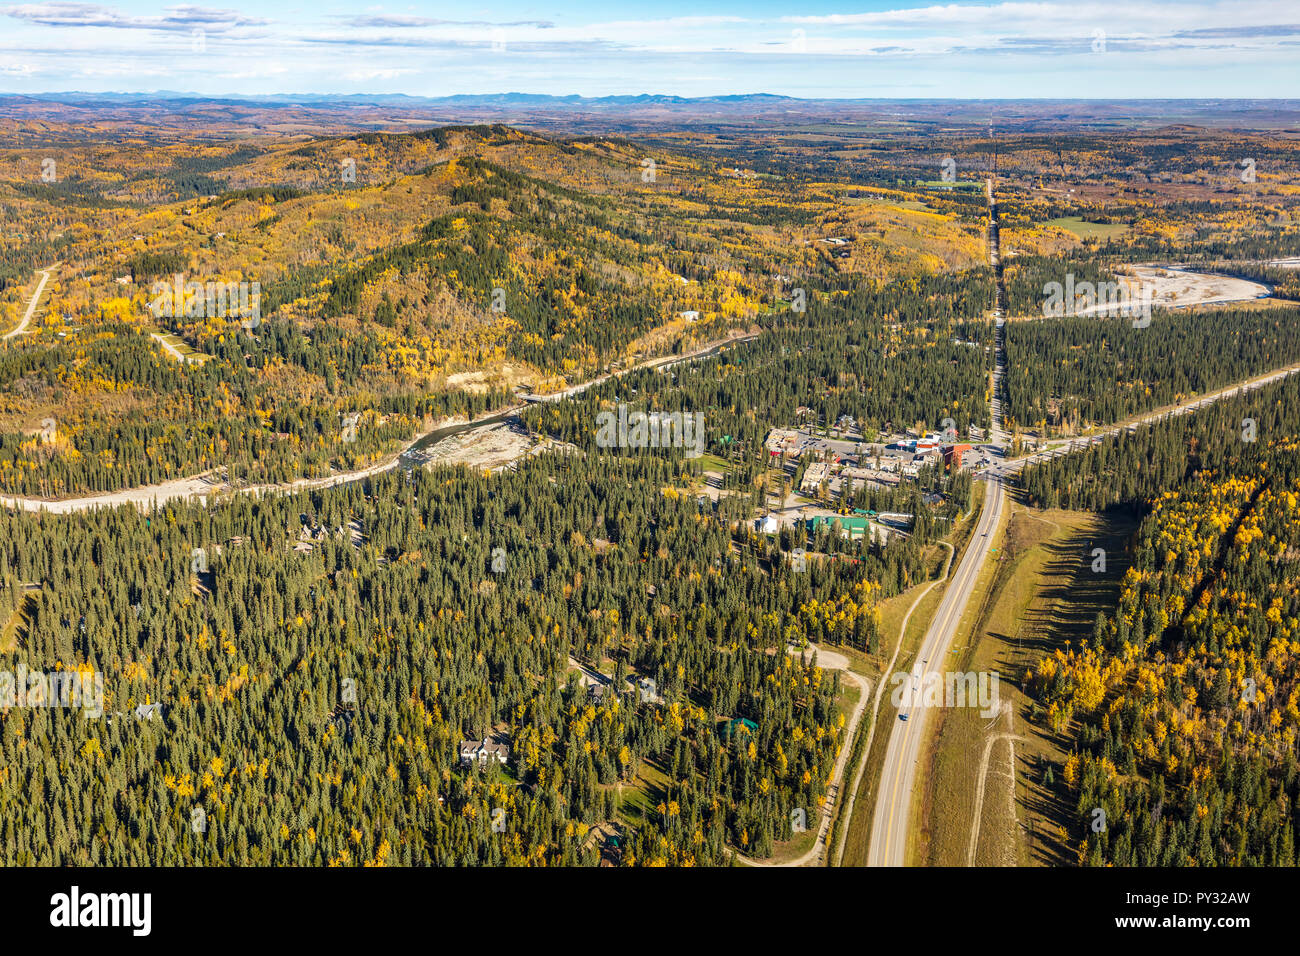 Aerial view of Bragg Creek, Alberta in the foothills west of Calgary from over the Cowboy Trail. Stock Photo